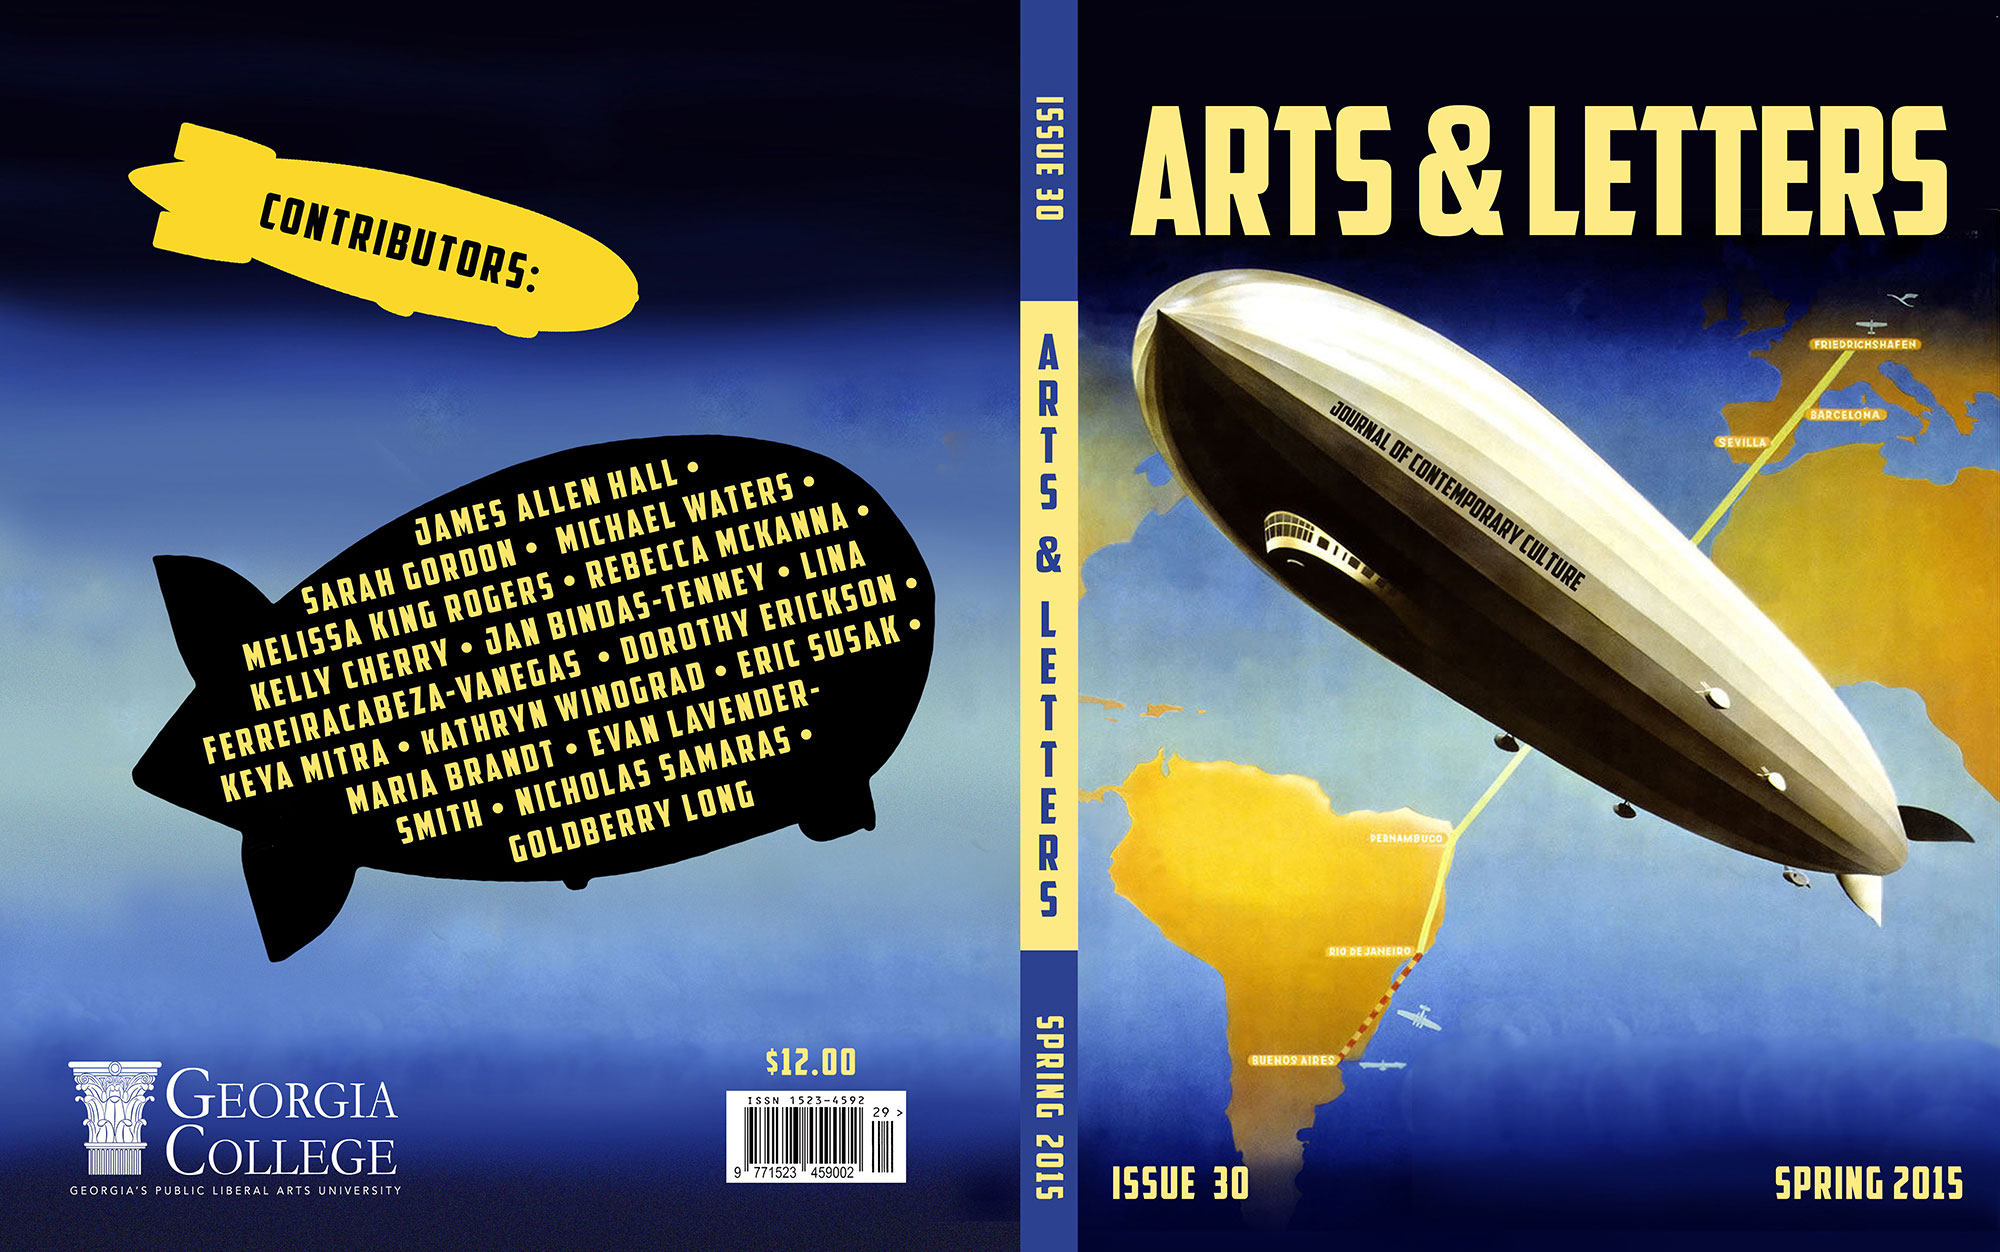 Arts & Letters, Issue 30